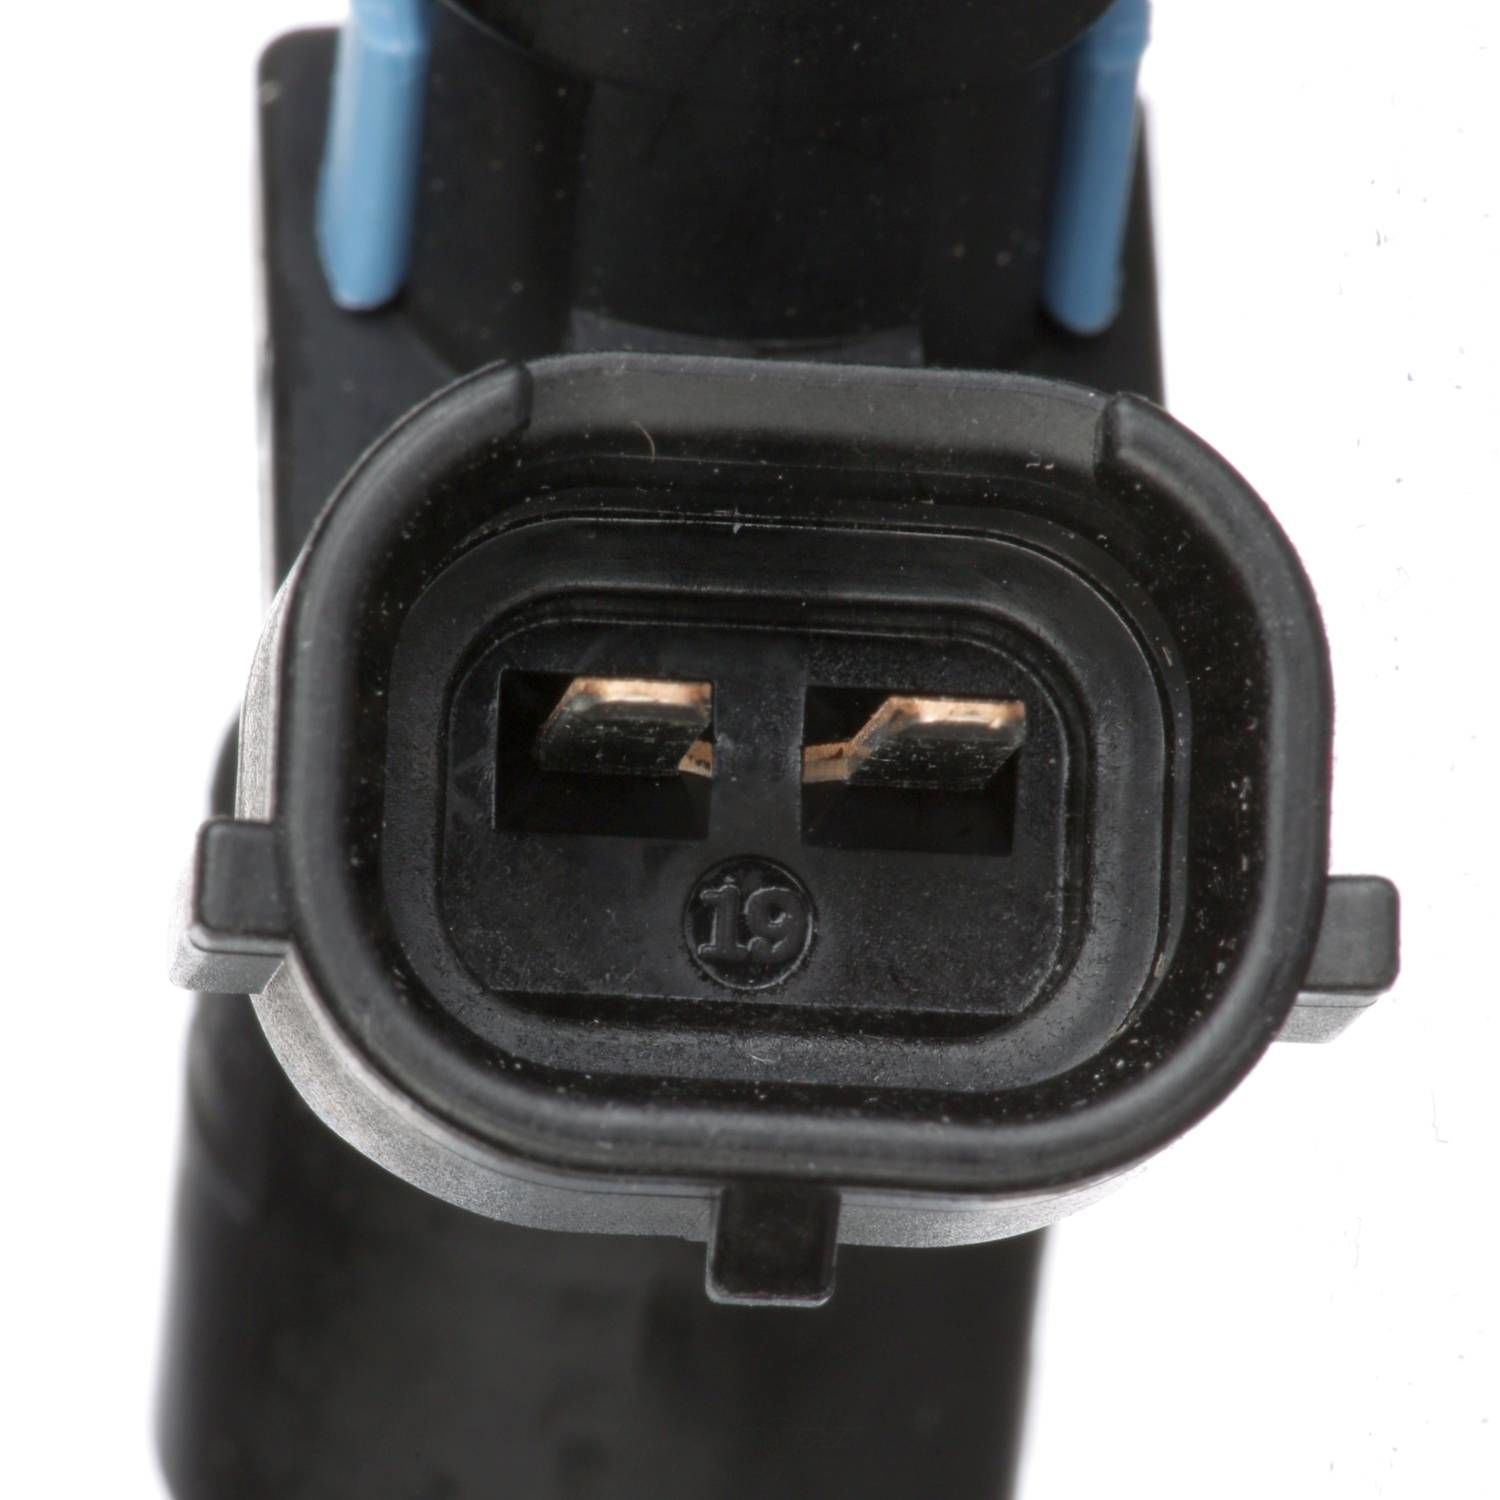 CONTINENTAL AFTERMARKET - Fuel Injector - CA1 FI11378S